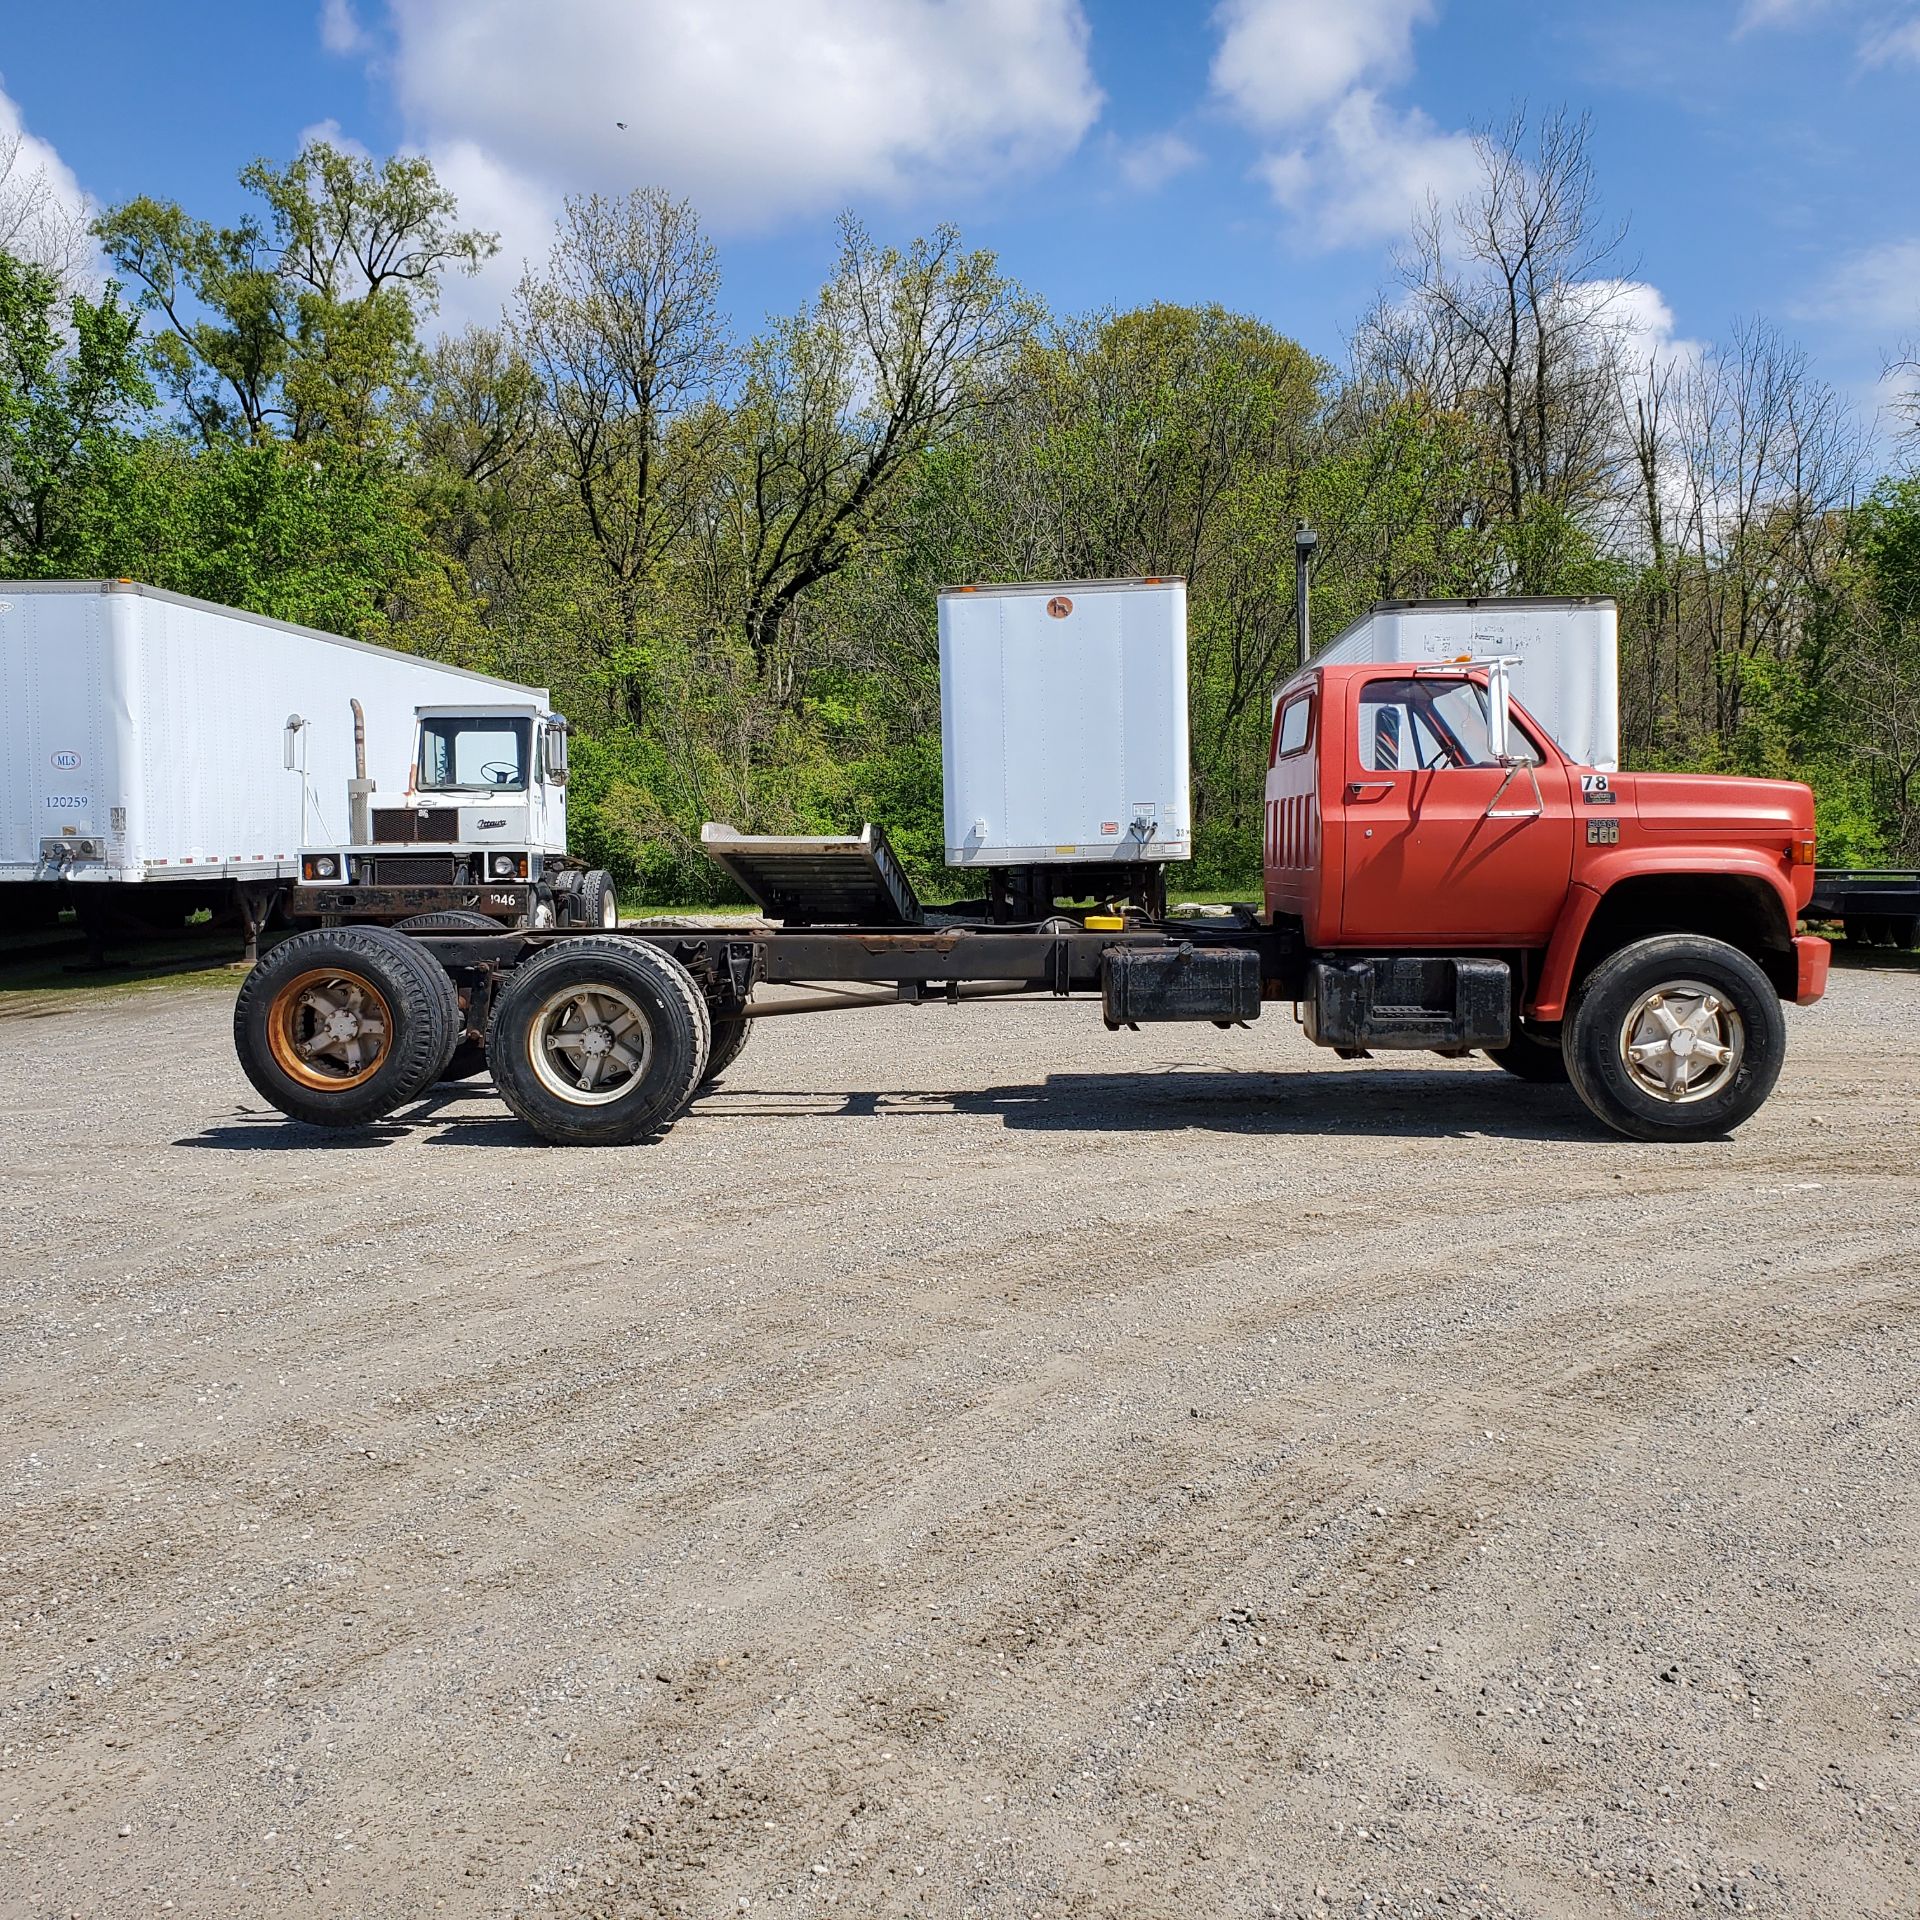 1977 Chevrolet C60 Cab and Chassis, Single Axle w/ Dual Tires and Tag Axle, 5 Speed Transmission - Image 4 of 19